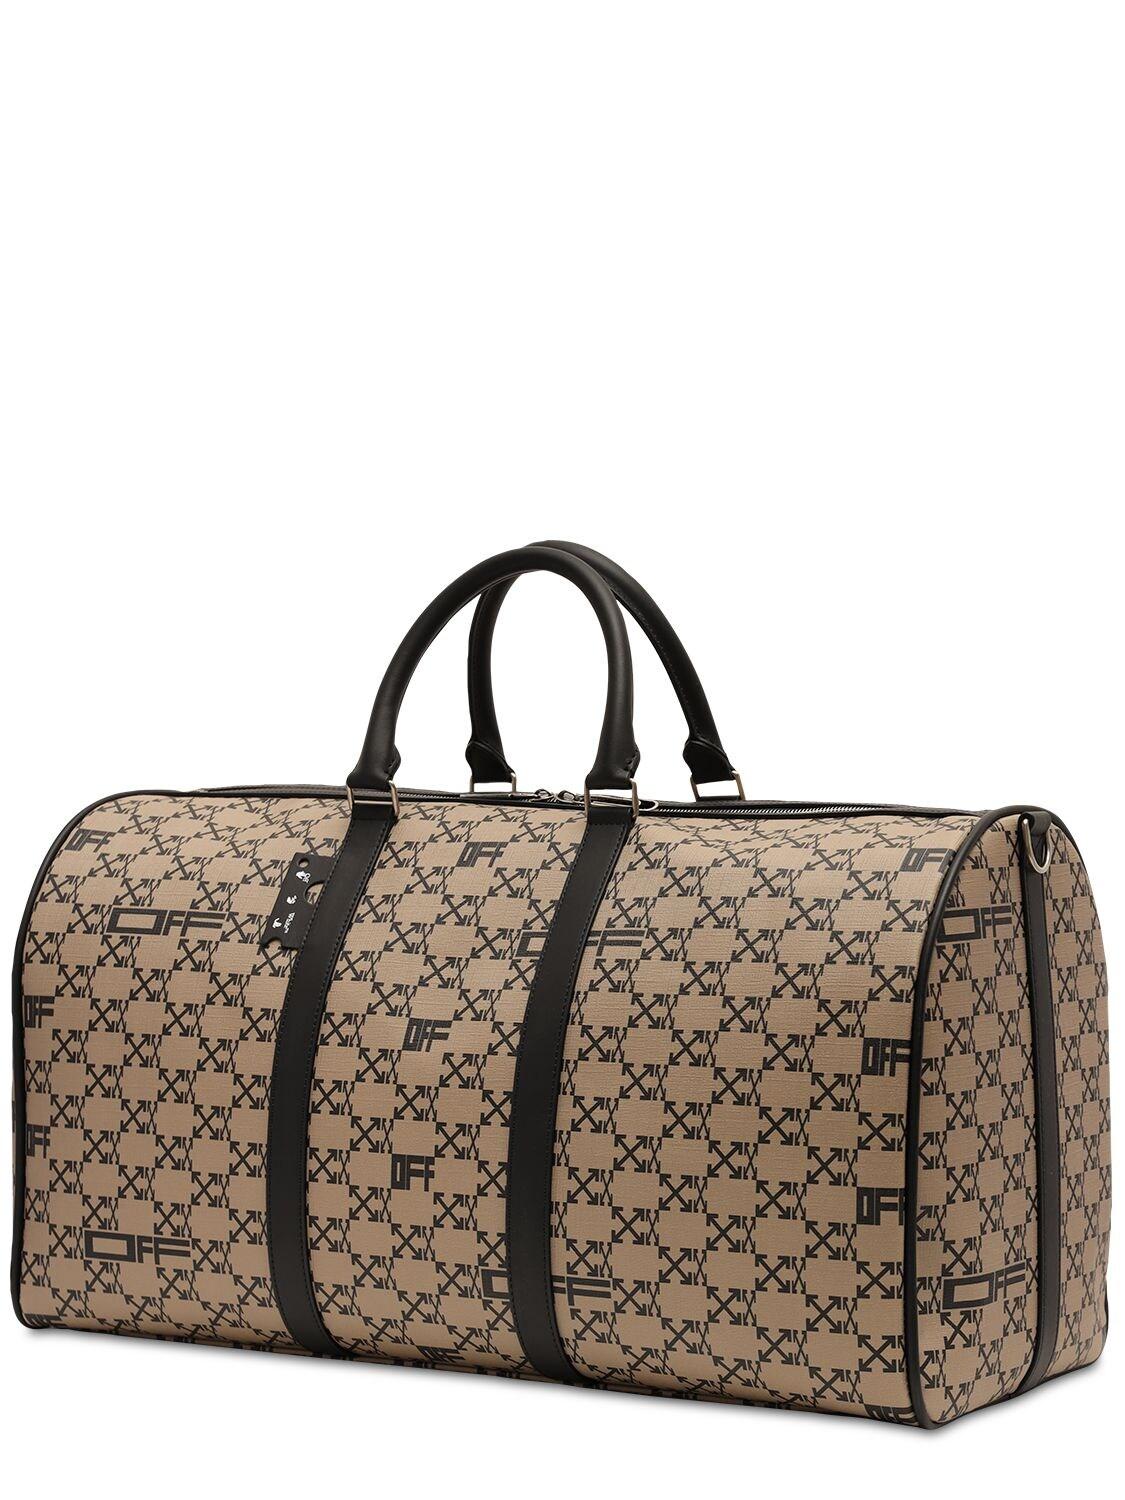 Louis Vuitton Virgil Abloh Brown, White, And Blue Monogram Coated